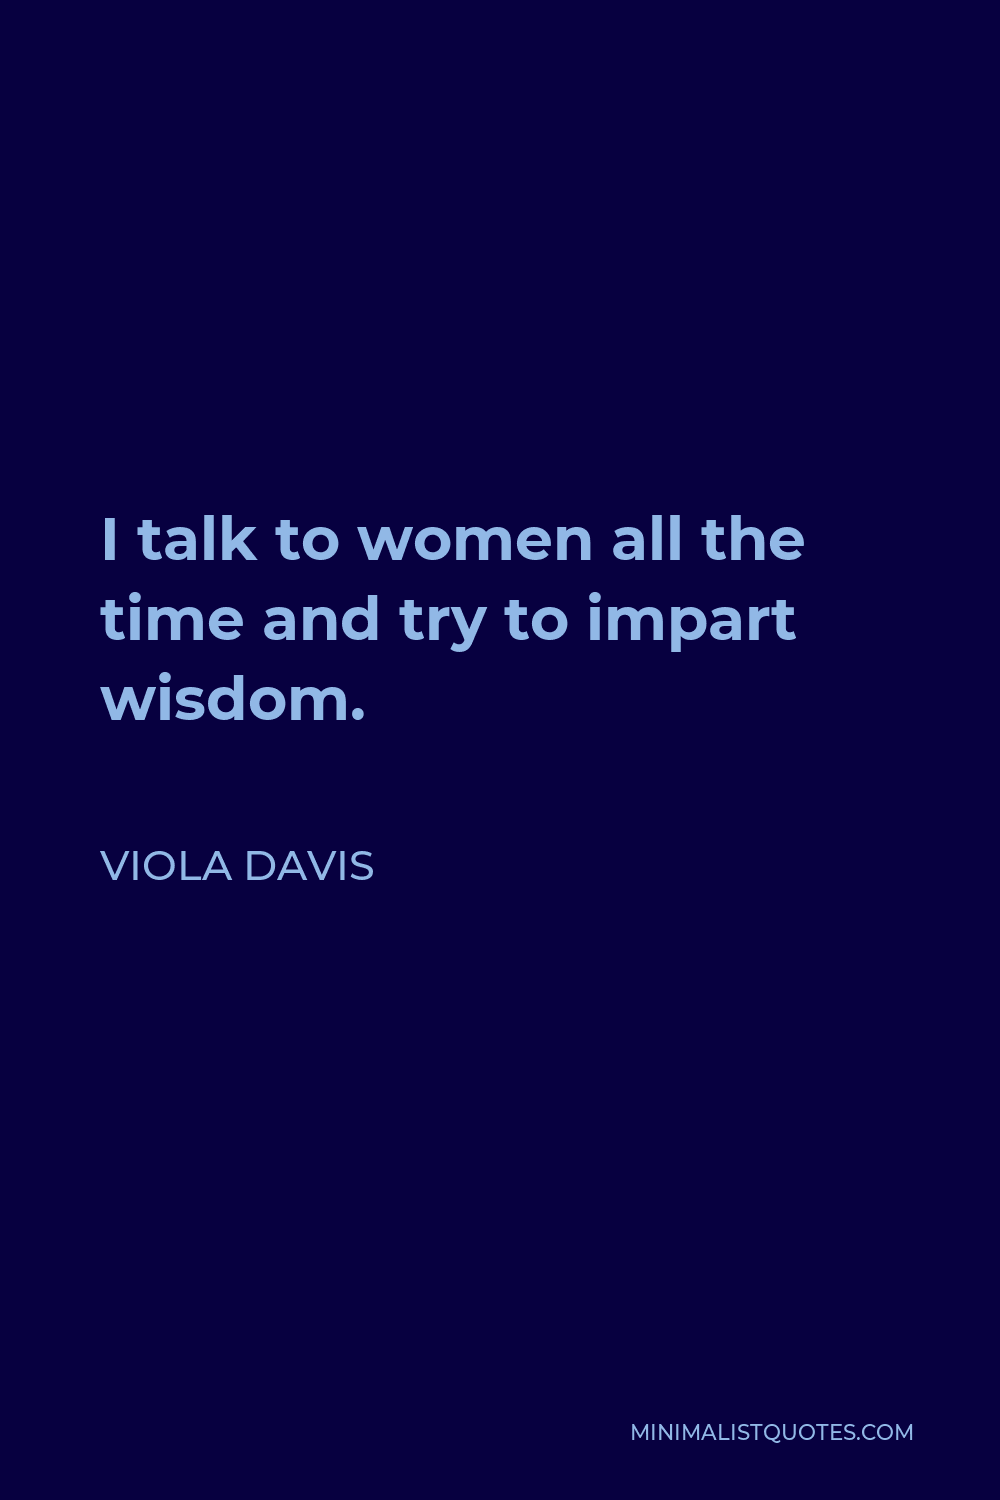 Viola Davis Quote - I talk to women all the time and try to impart wisdom.